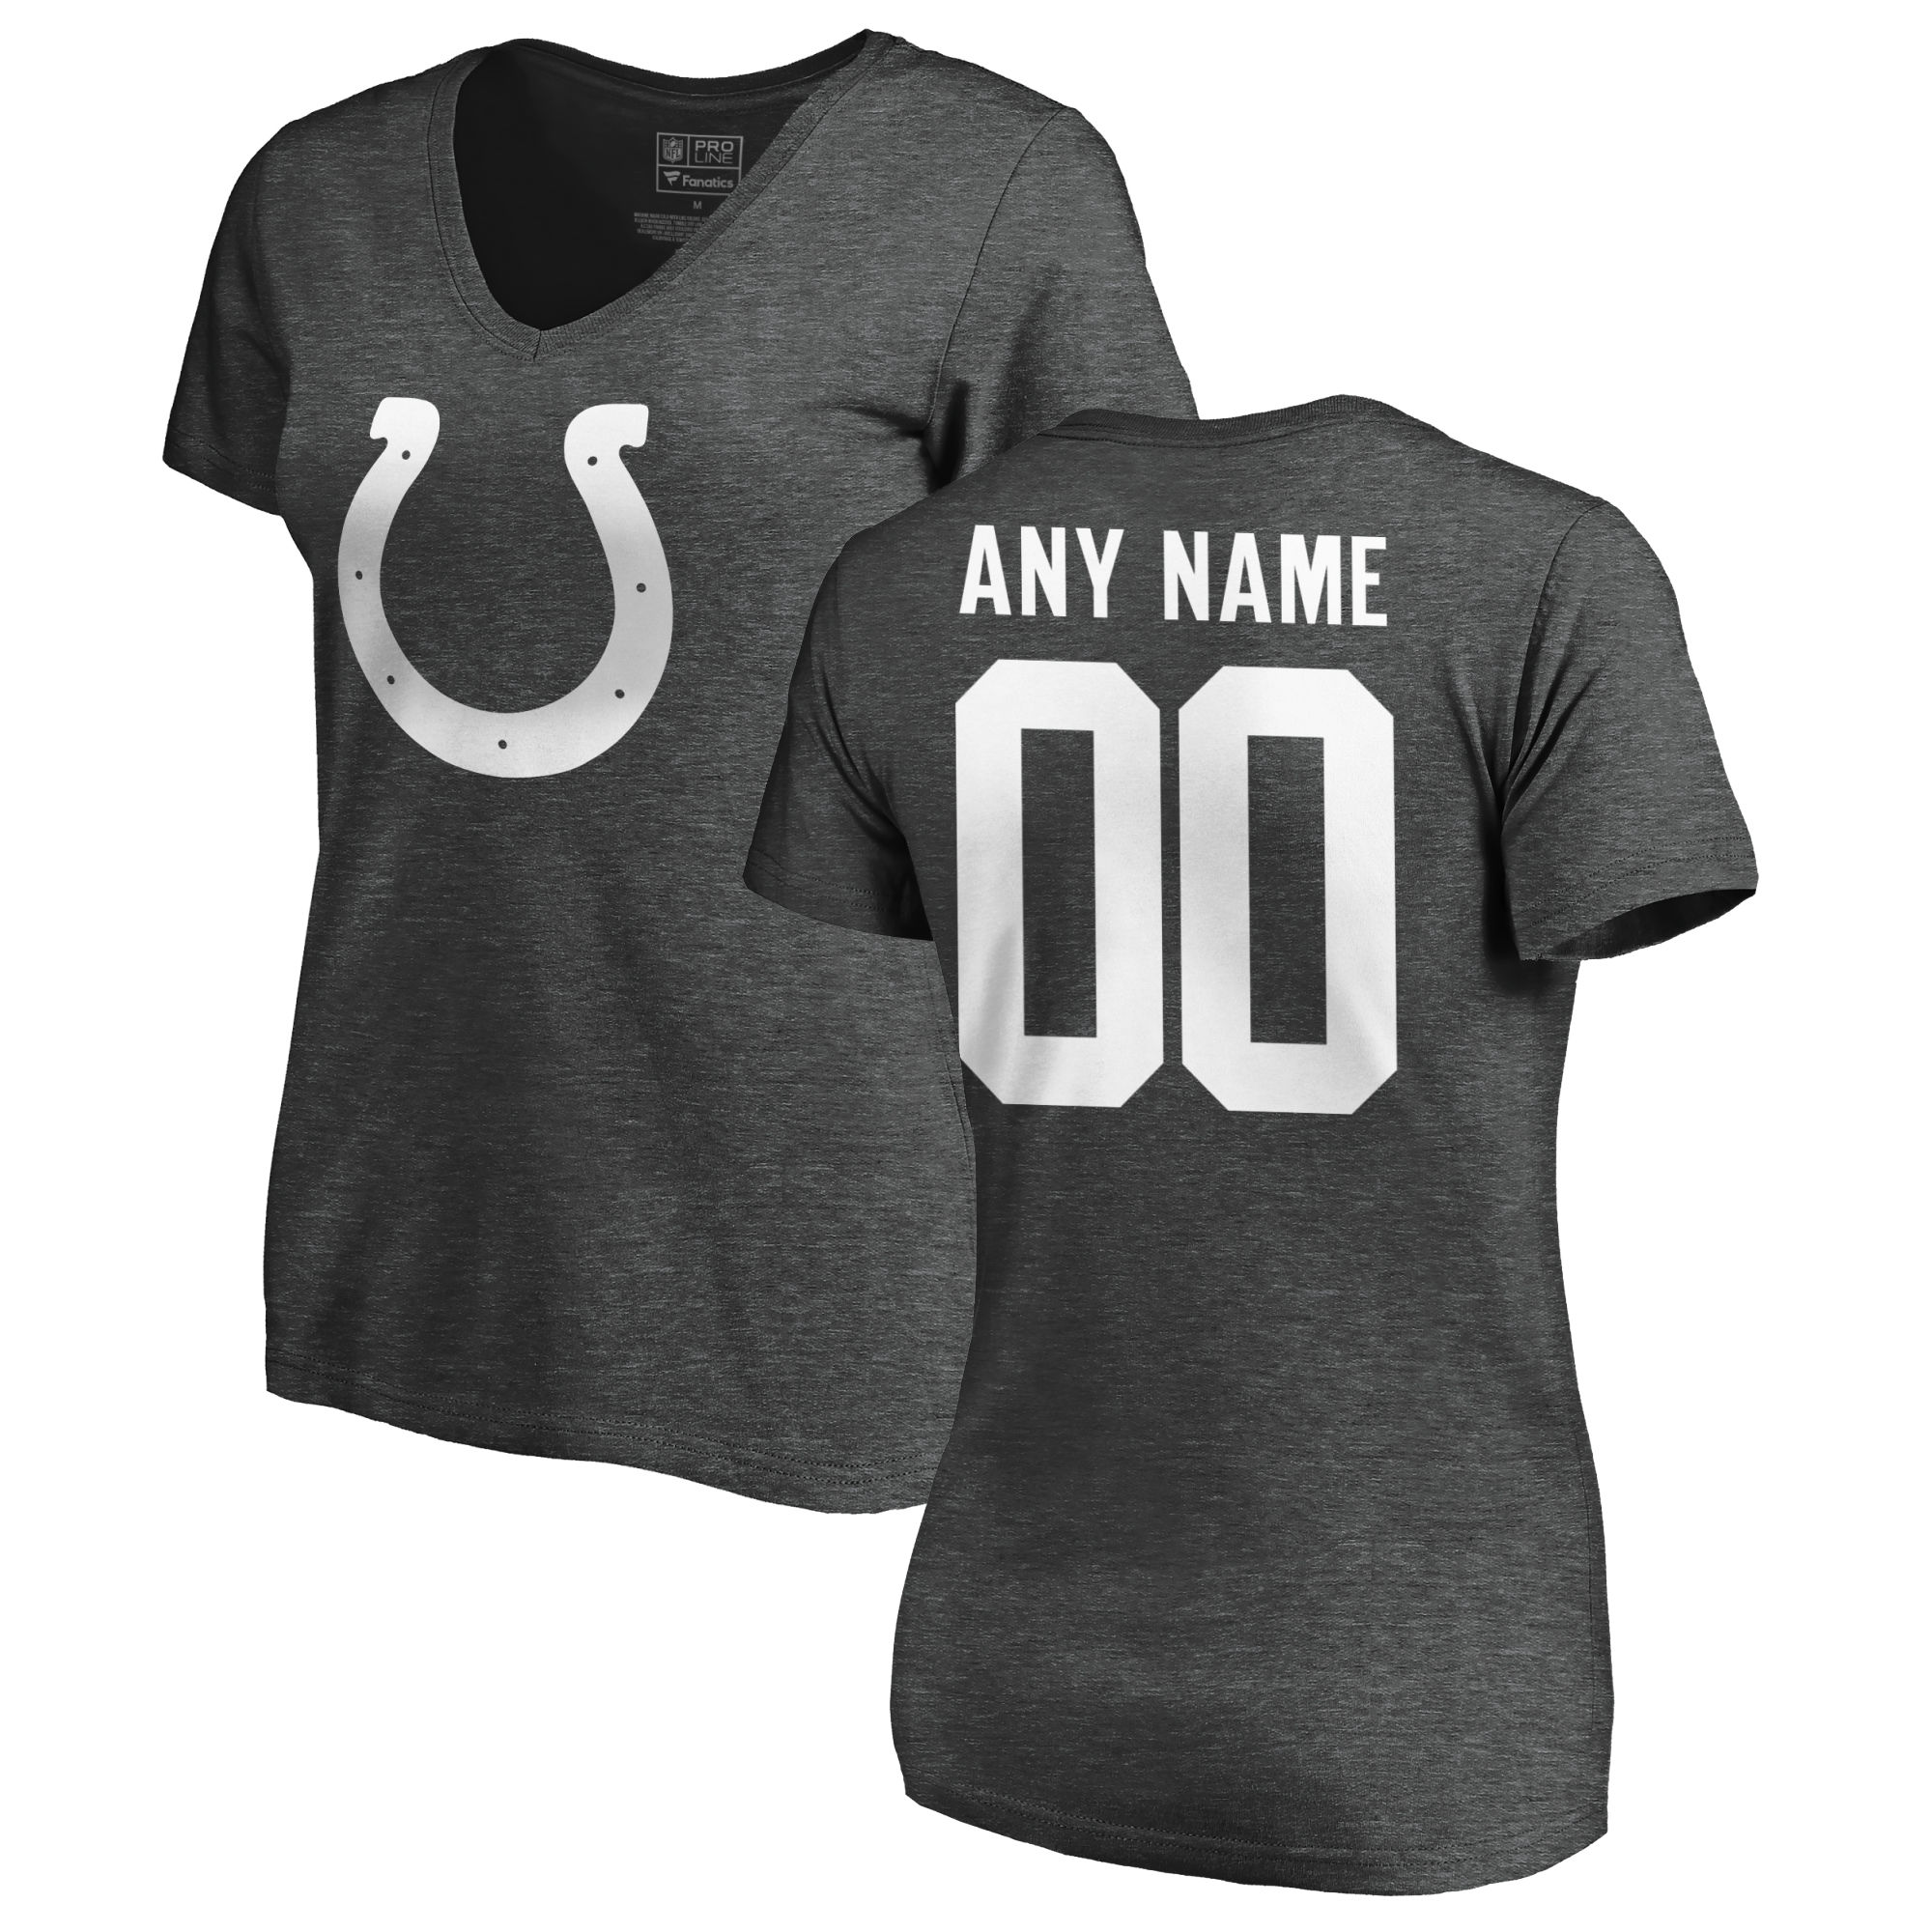 Indianapolis Colts Women's Shirt NFL Pro Line by Personalized One